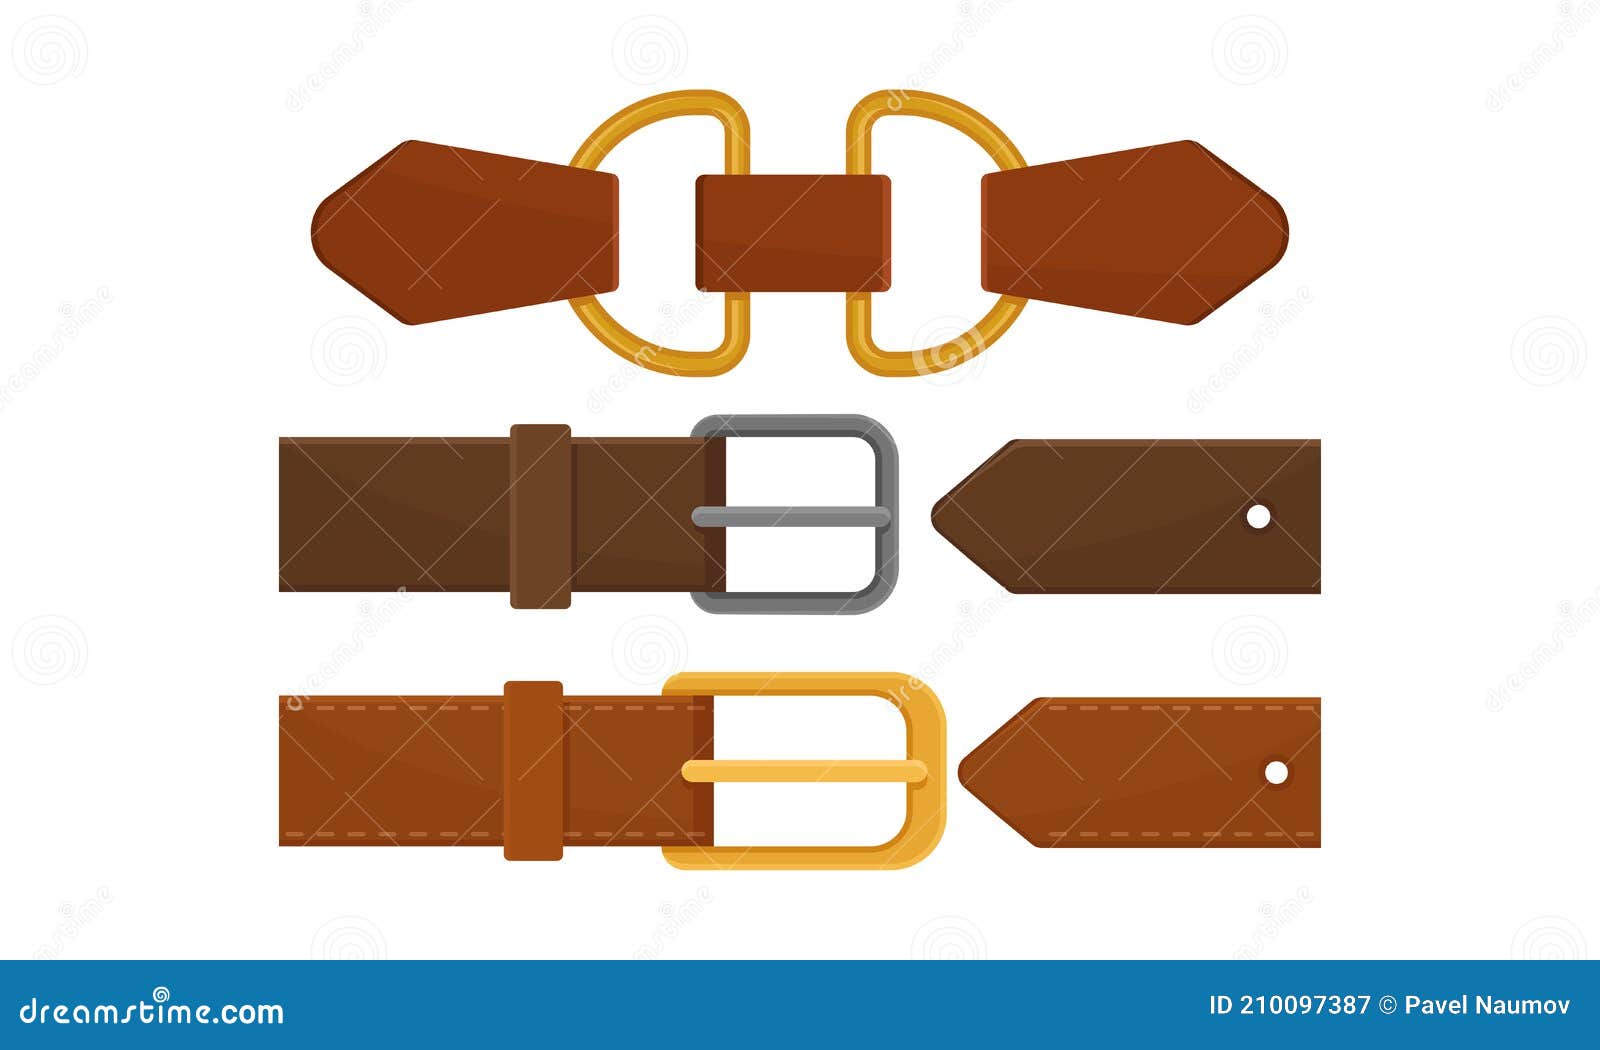 Leather Belt with Buckle or Clasp As Band or Strap Worn Around the ...